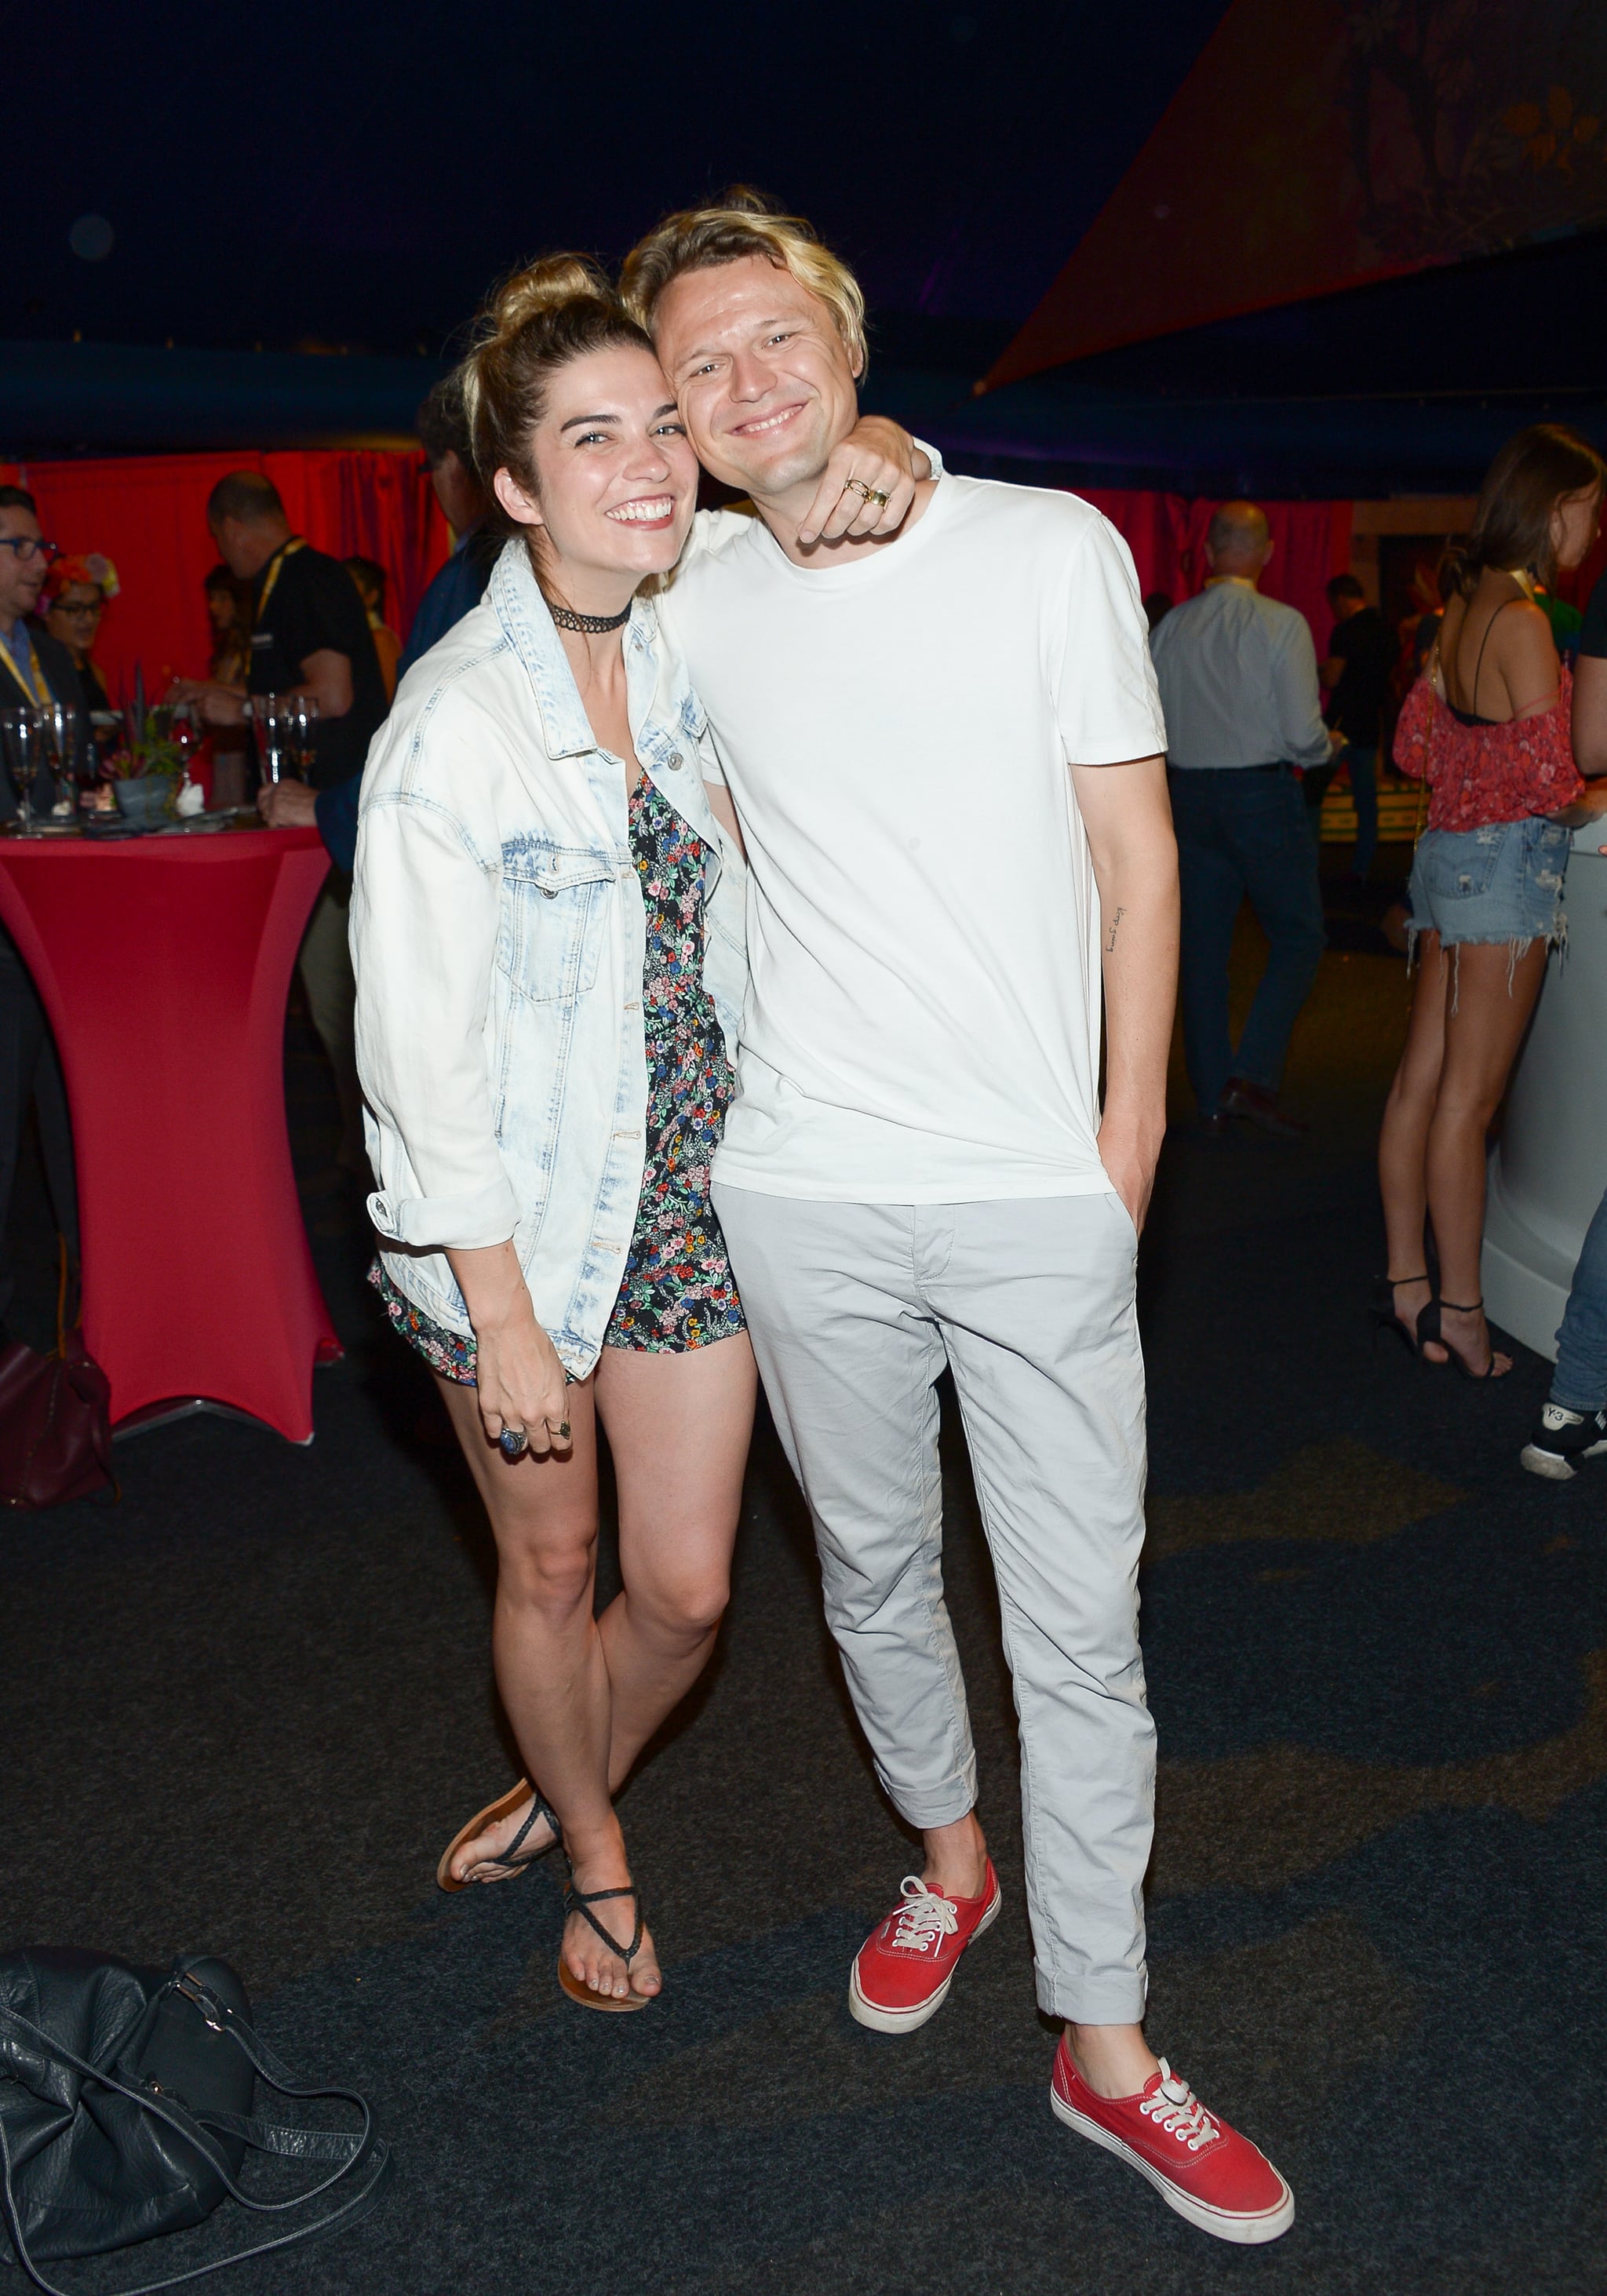 TORONTO, ON - JULY 28:  Annie Murphy and Menno Versteeg attends the opening of Cirque Du Soleil's